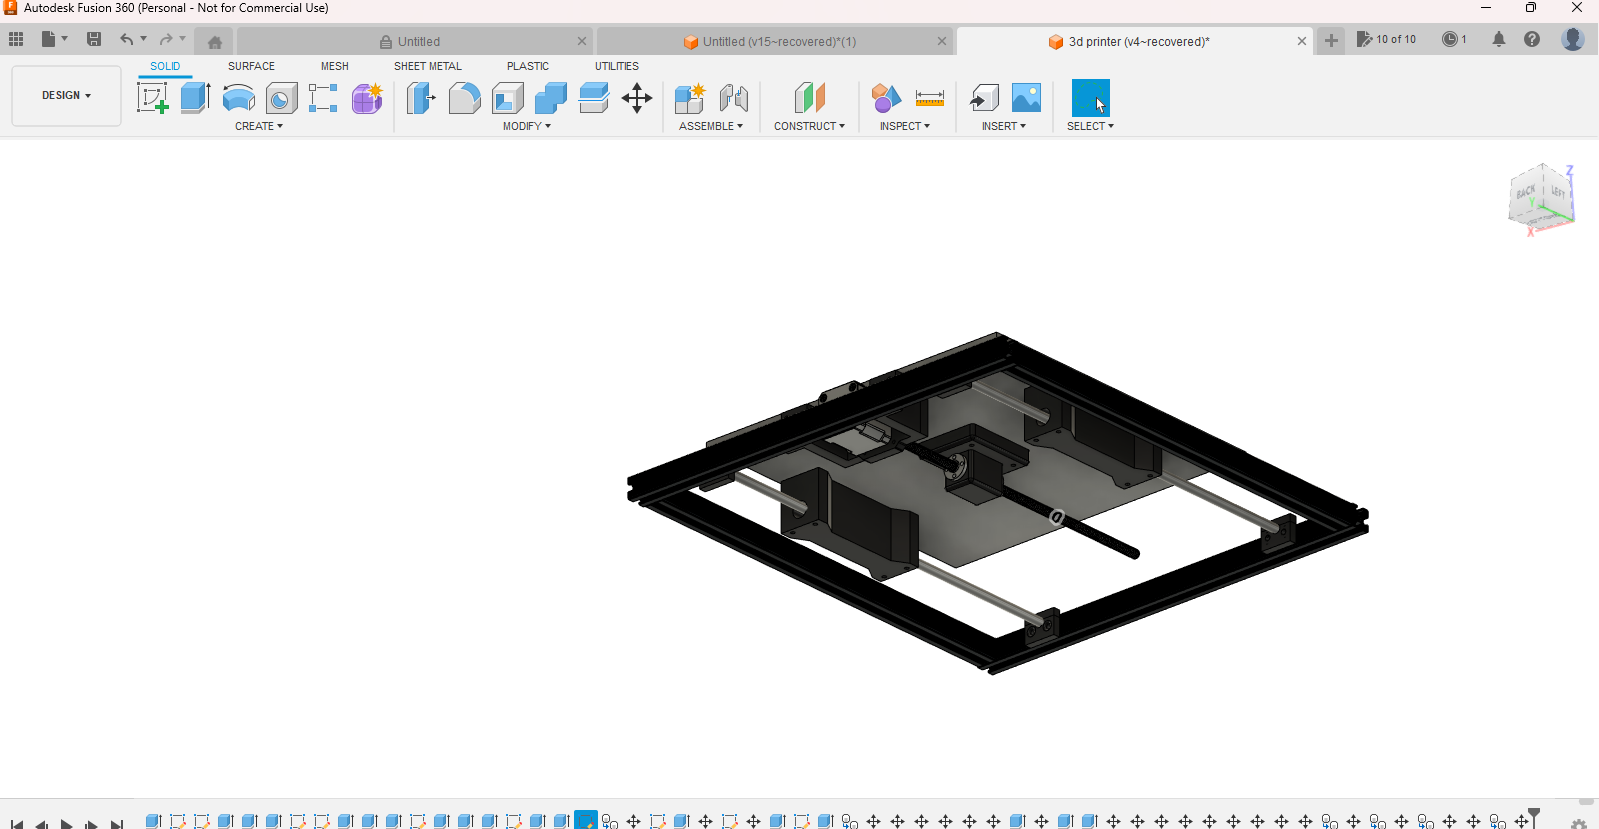 Autodesk Fusion 360 (Personal - Not for Commercial Use) 5_31_2023 7_43_53 PM.png